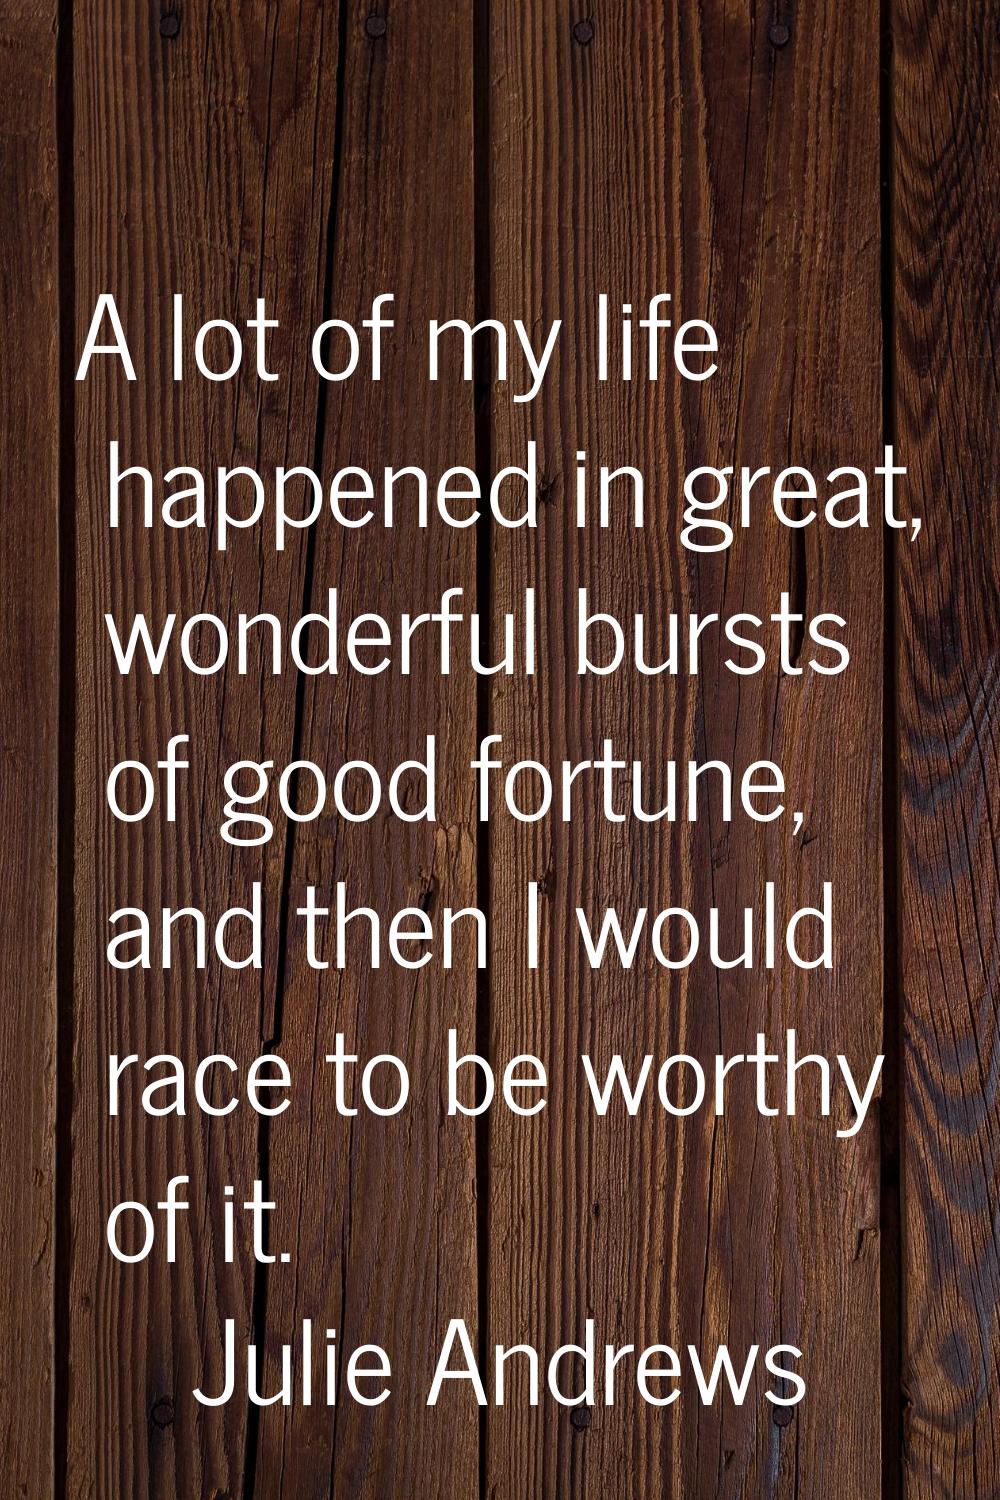 A lot of my life happened in great, wonderful bursts of good fortune, and then I would race to be w